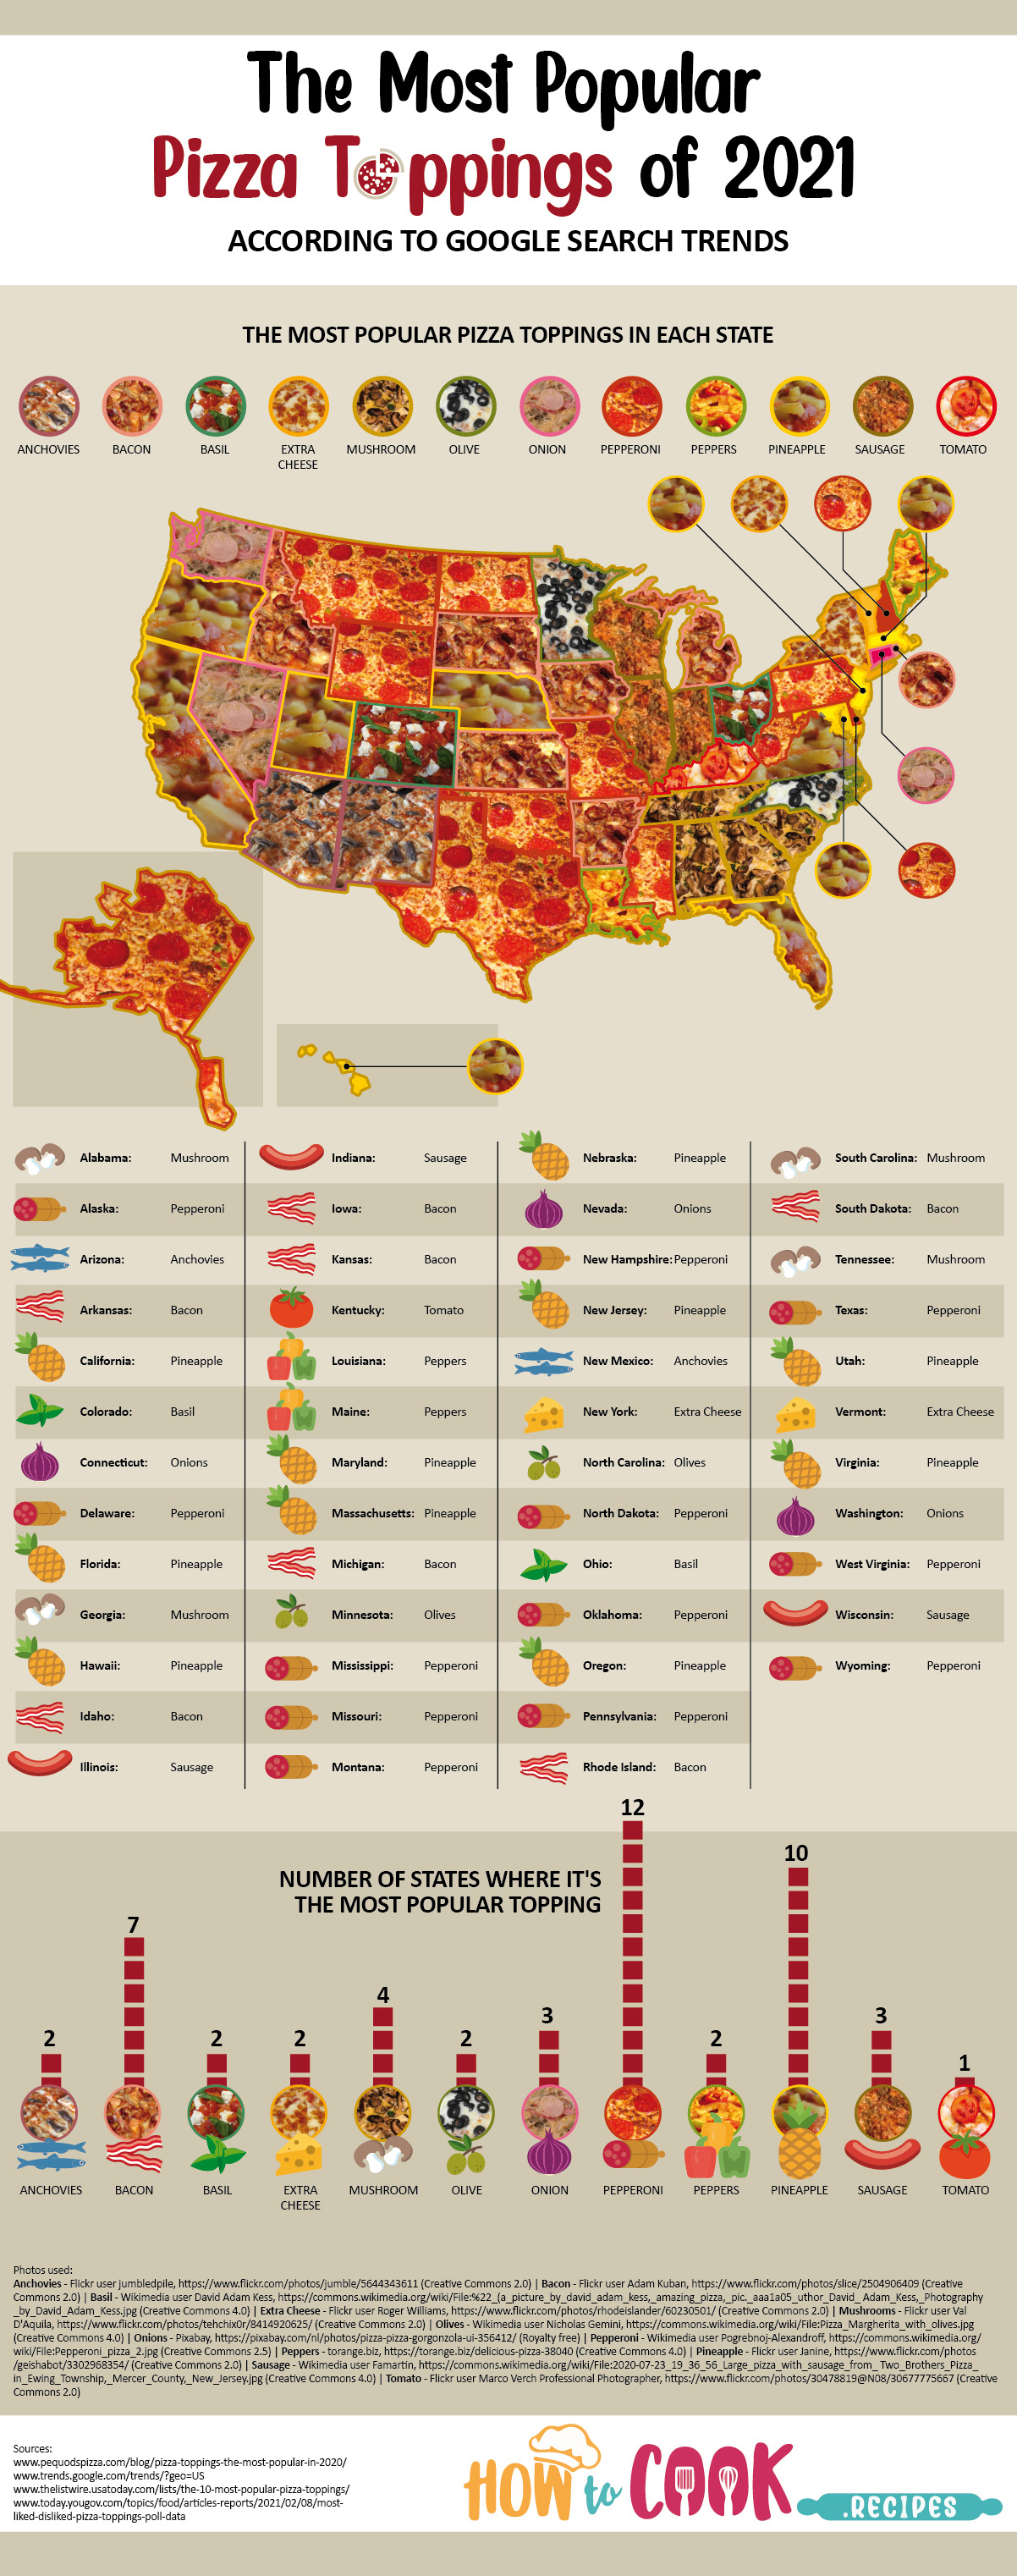 The Most Popular Pizza Toppings by State in 2021 According to Google Search Trends